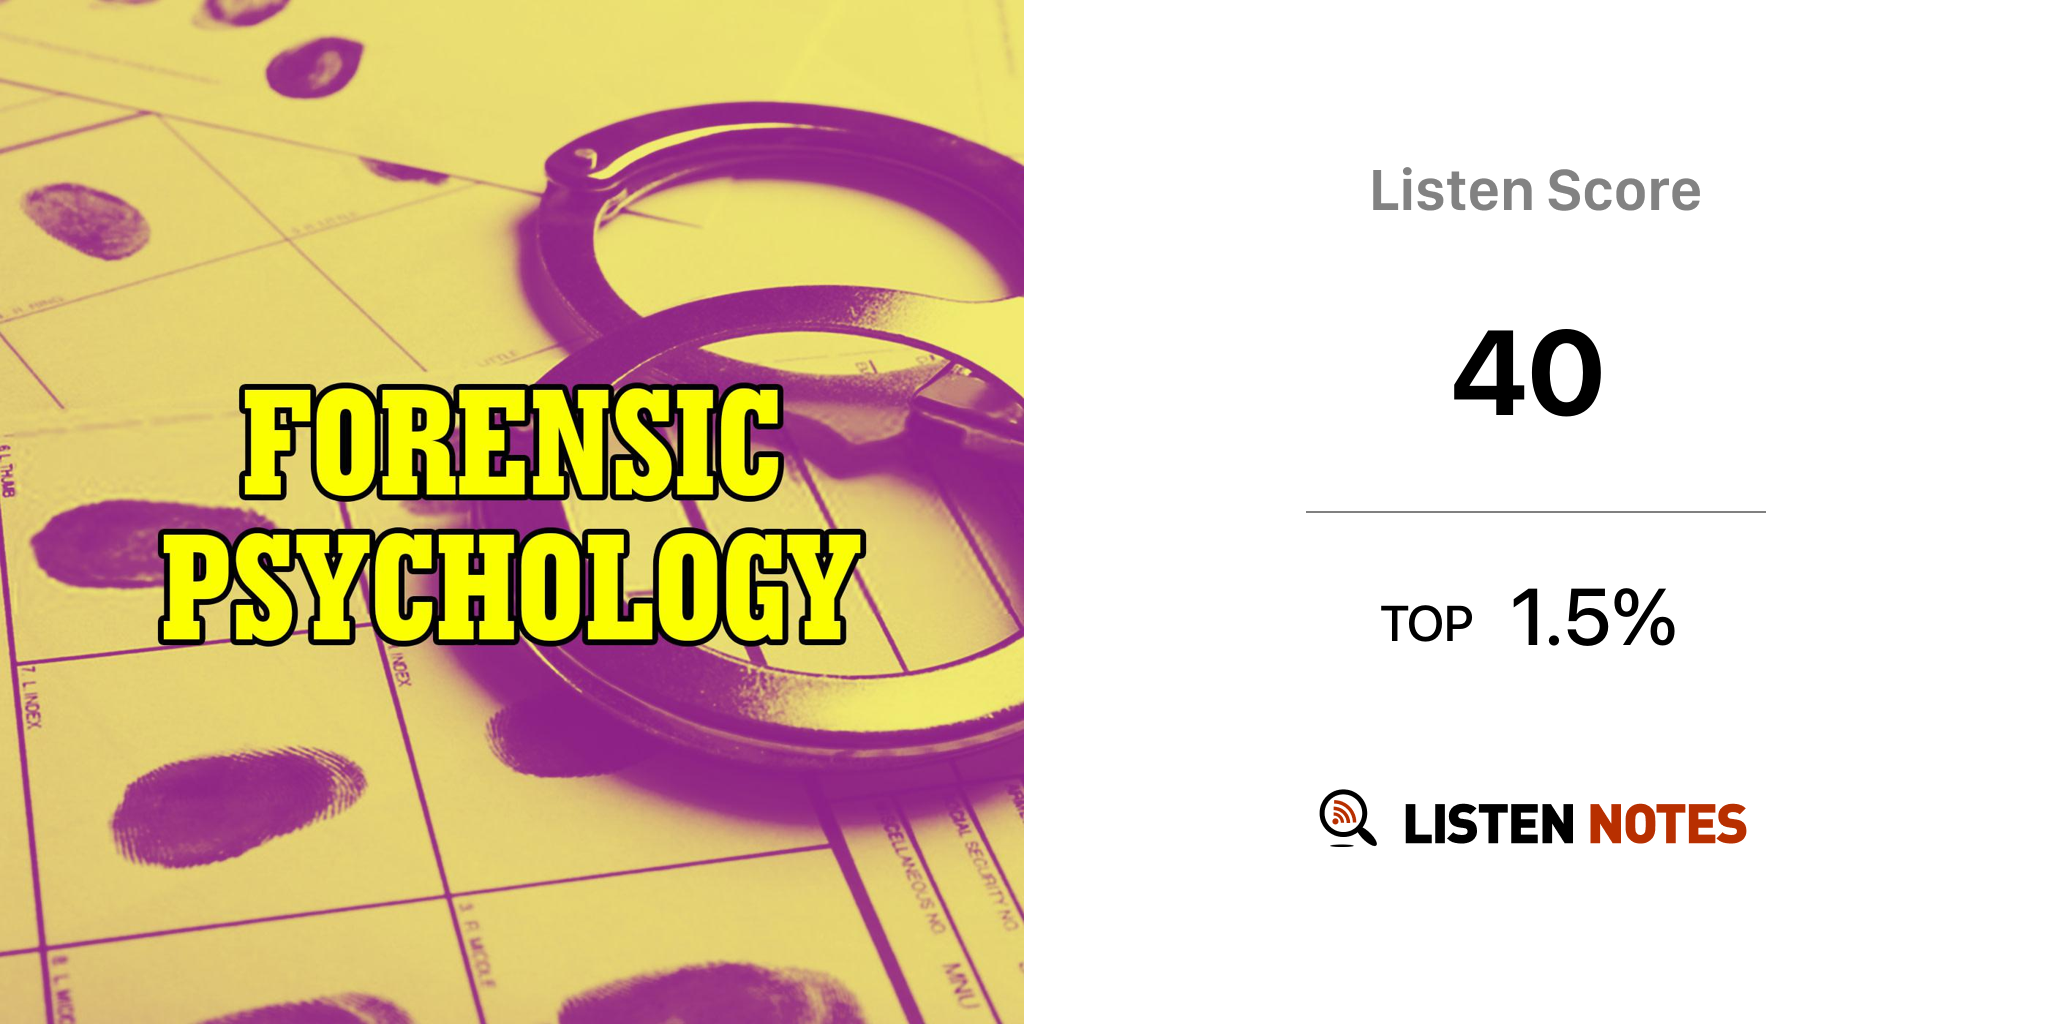 forensic-psychology-podcast-circle-of-insight-productions-listen-notes